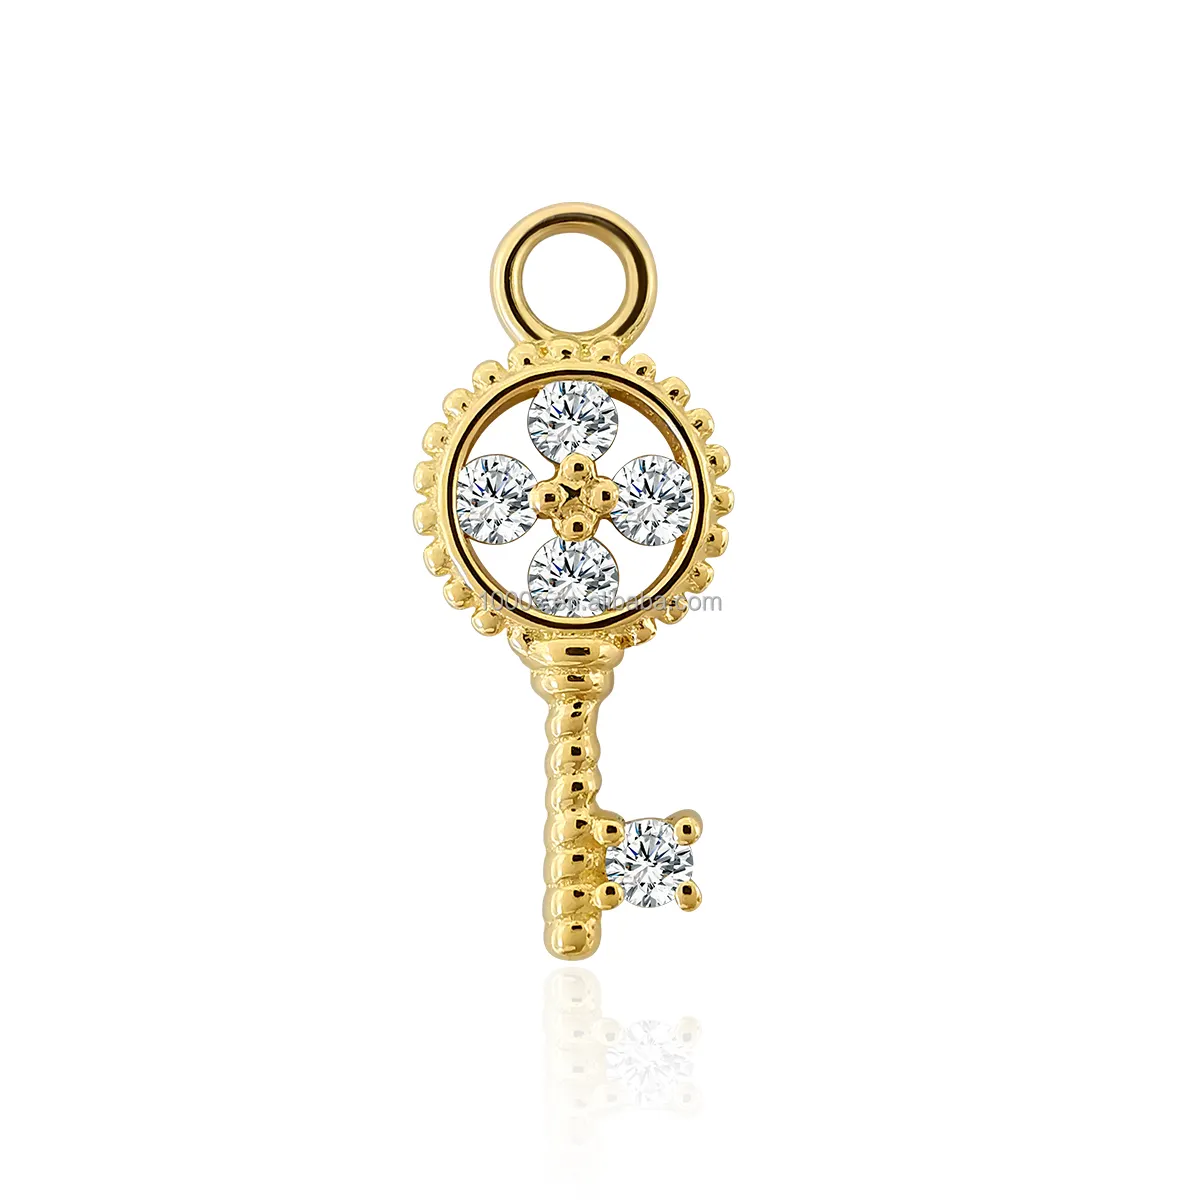 Wholesale 14K Solid Gold With Moissanite Charm Pendant Design For Jewelry Bracelet Making